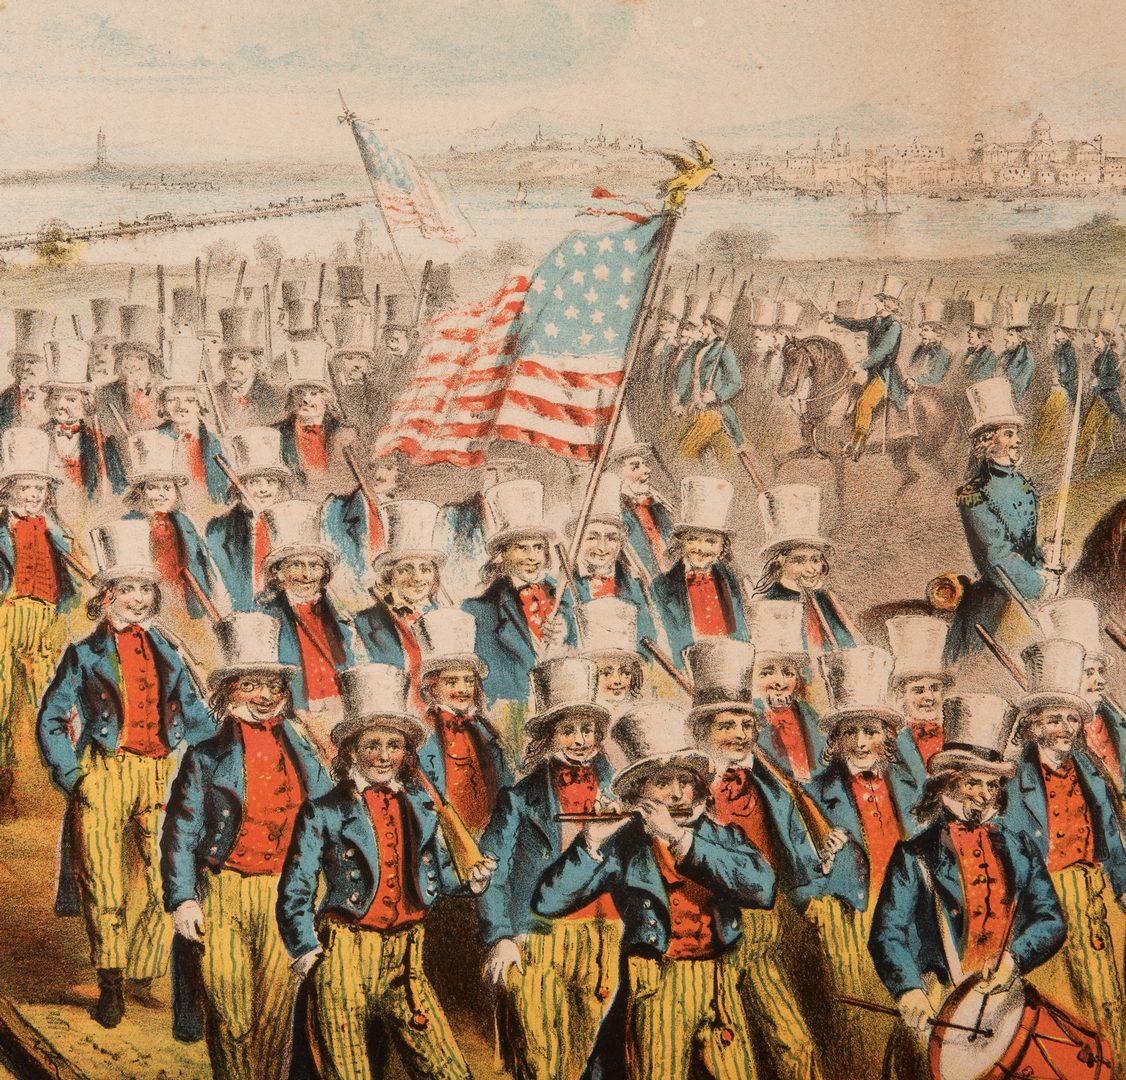 Lot 516: Chromolithographic Print, Yankee Volunteers Marching into Dixie, 1862